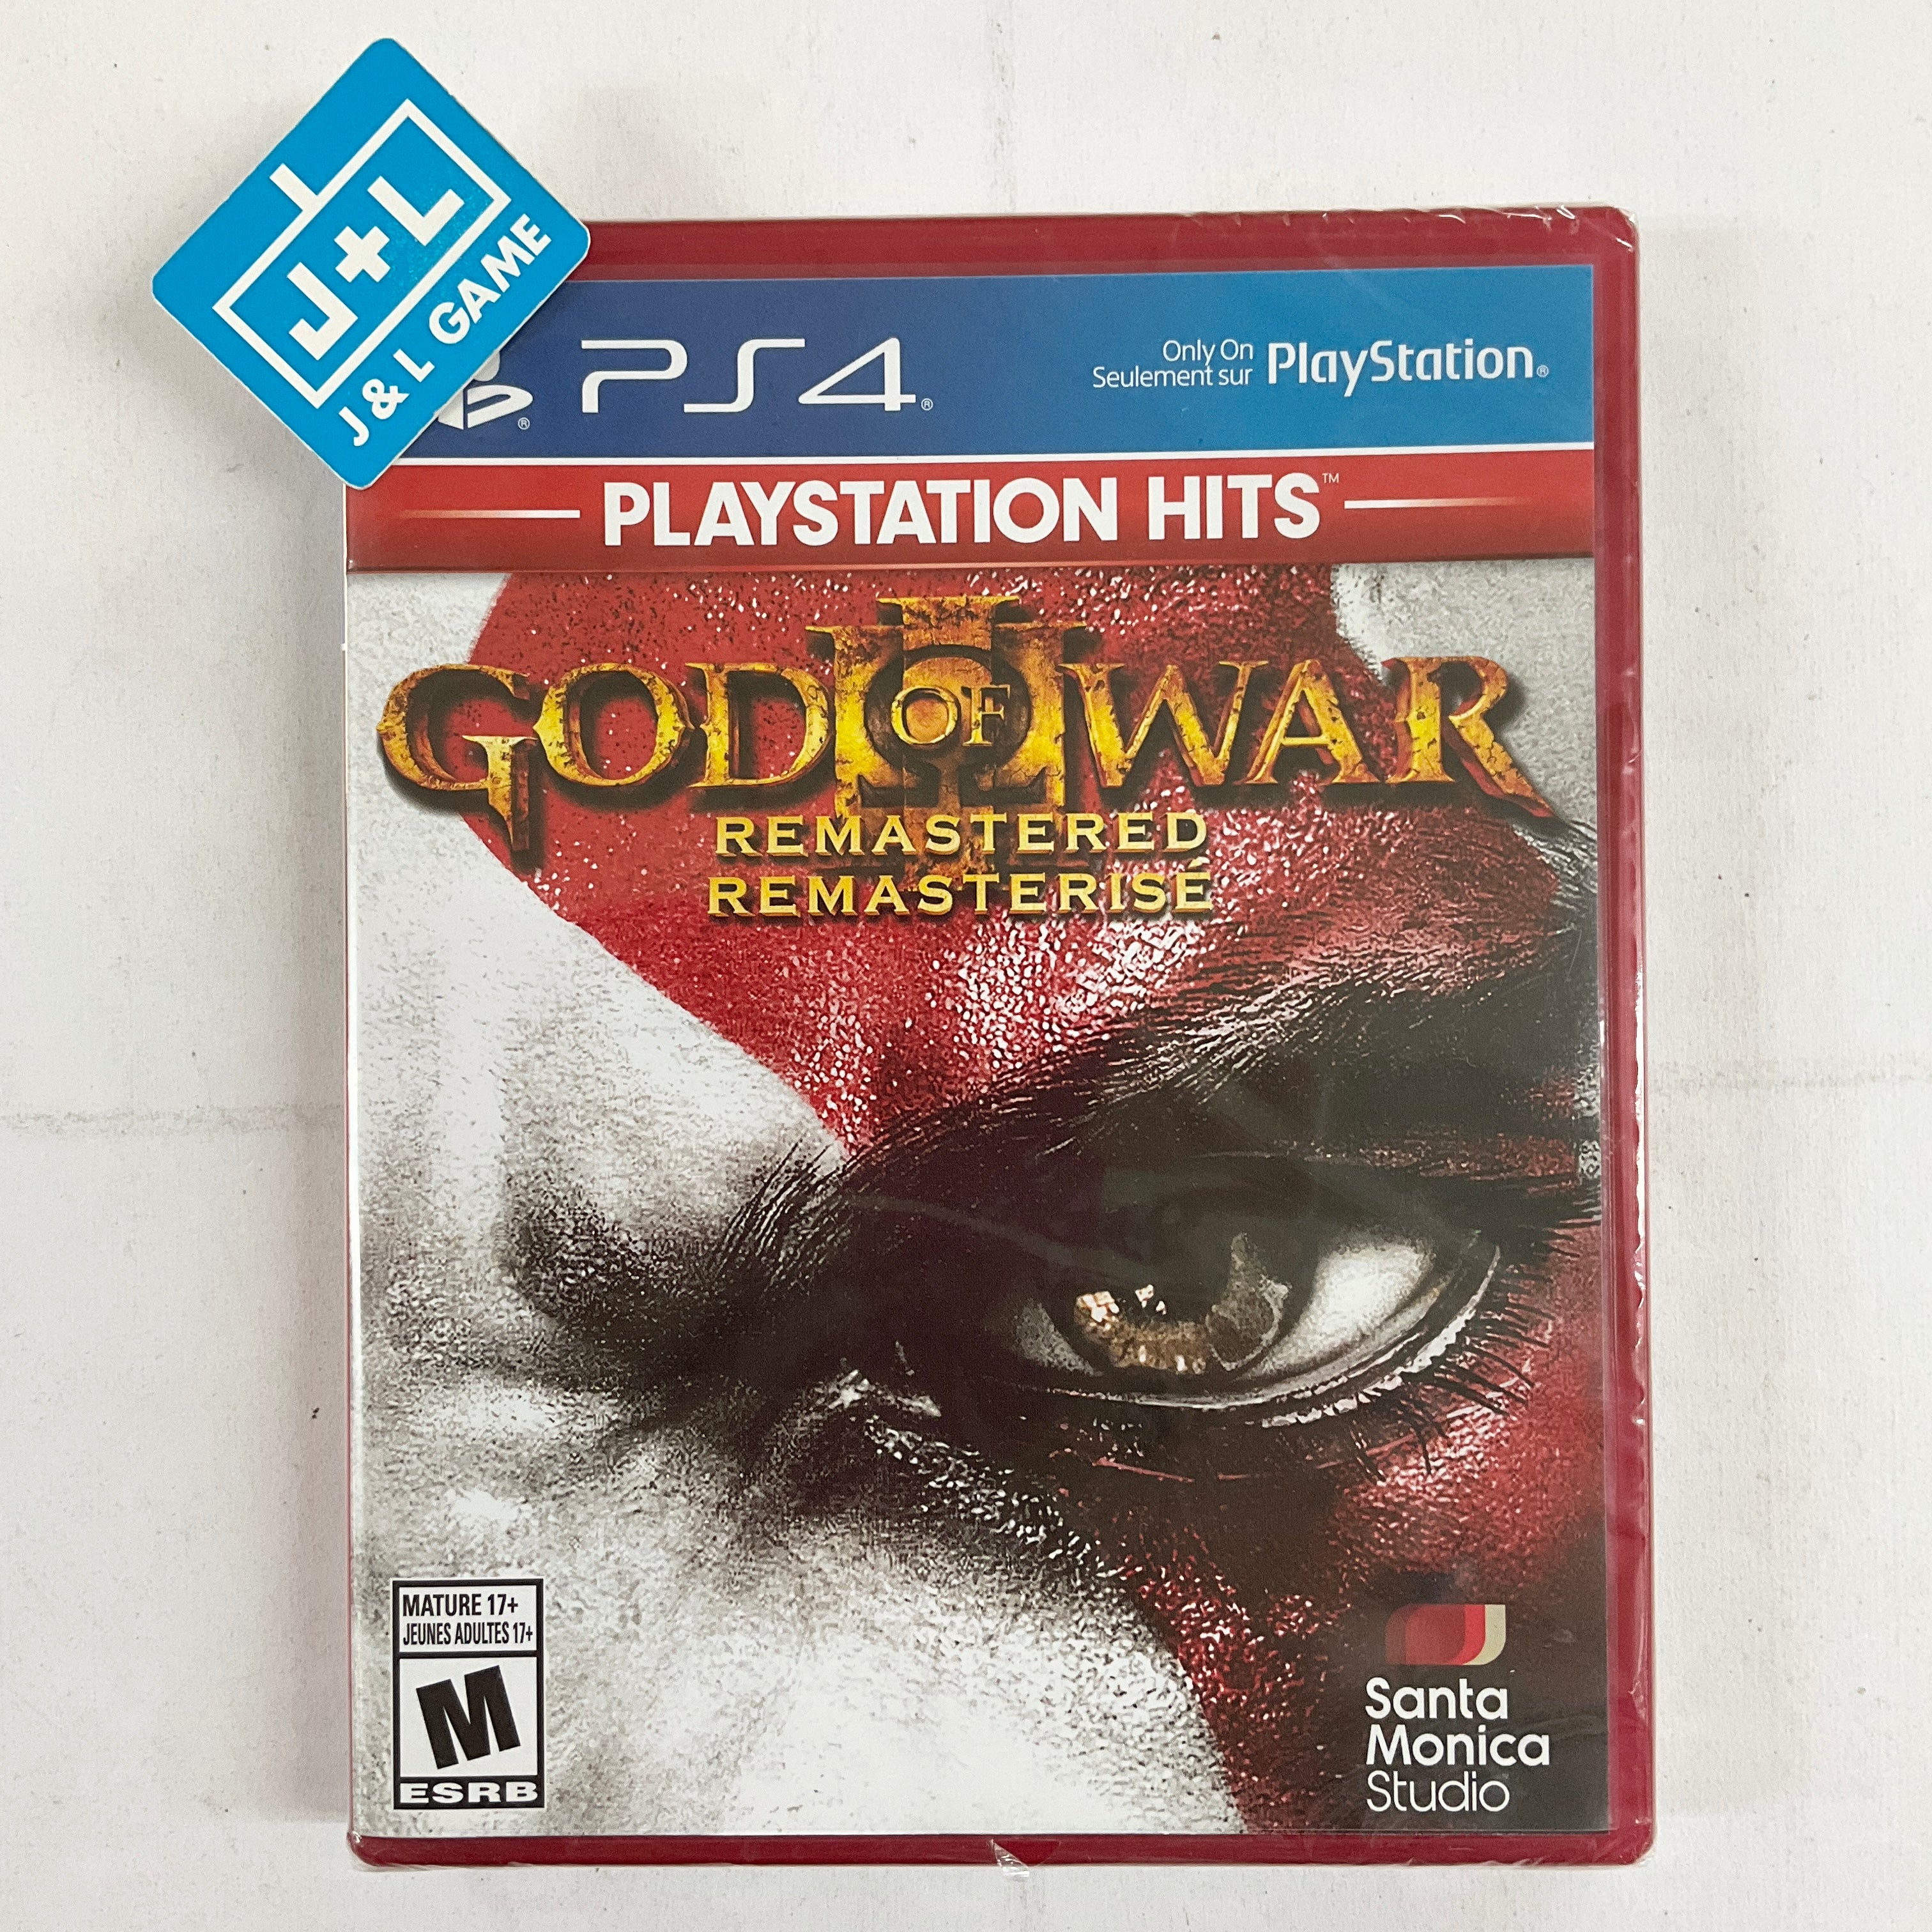 God of War III Remastered (Playstation Hits) - (PS4) PlayStation 4 Video Games SCEA   